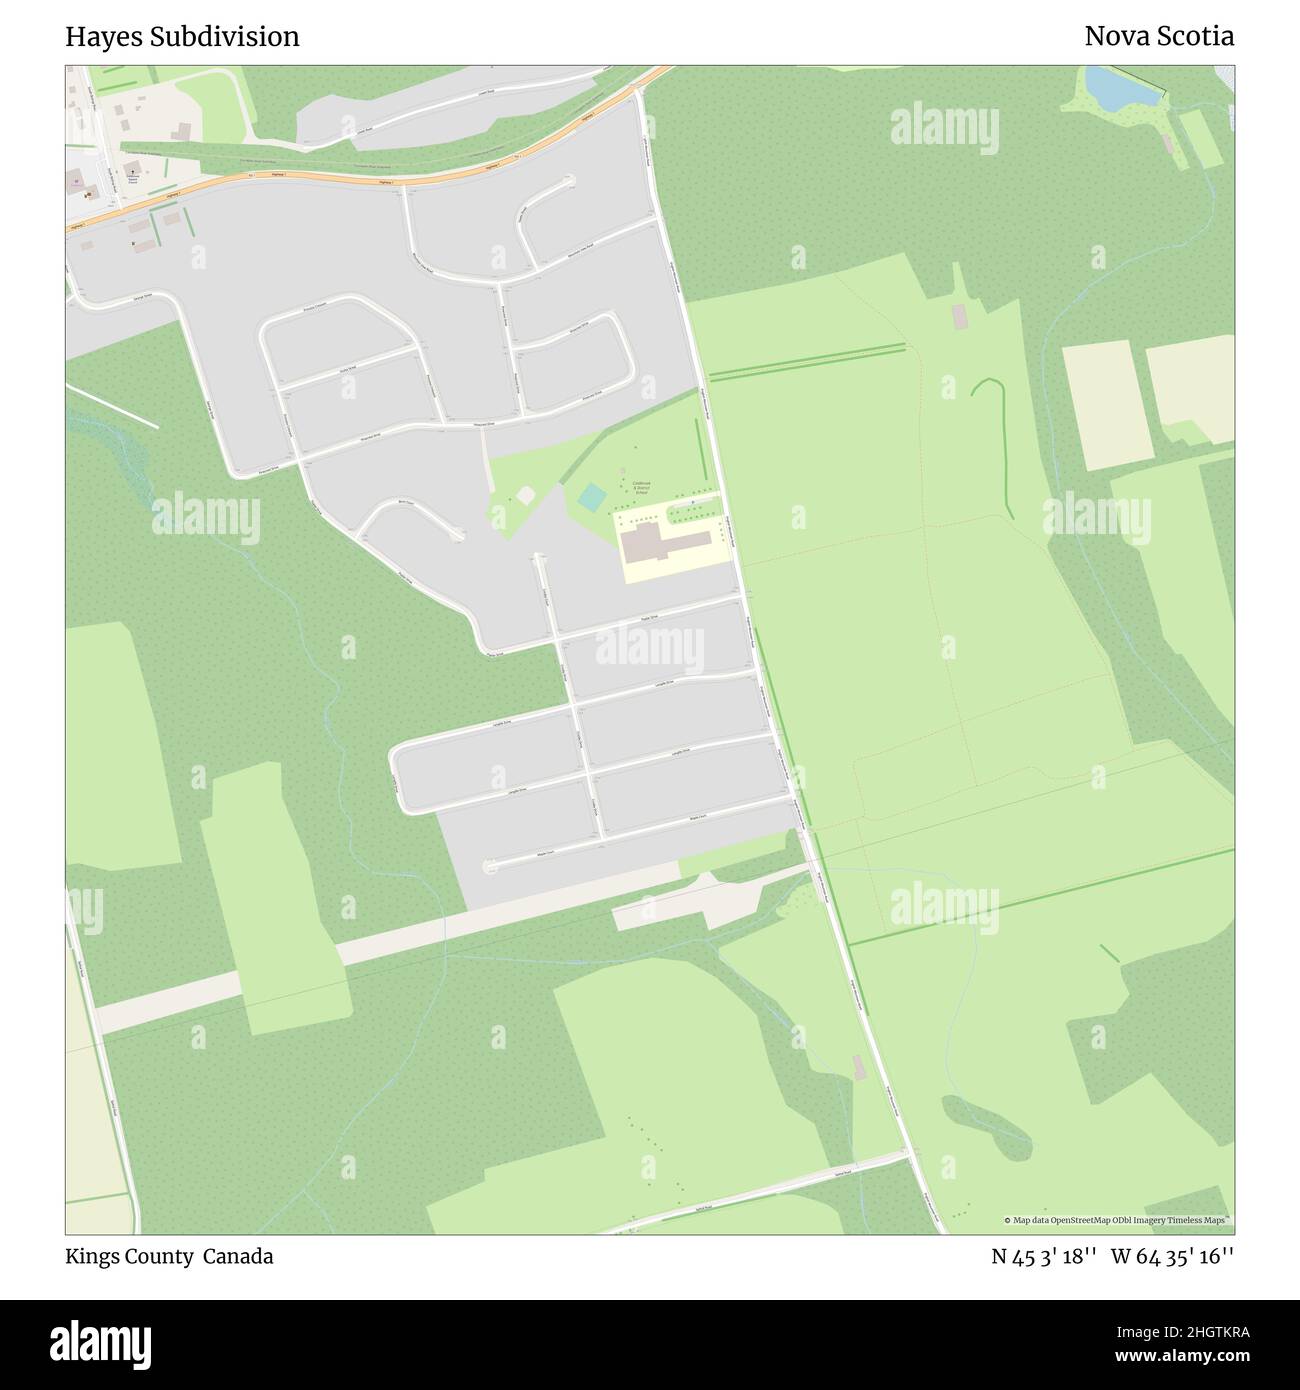 Hayes Subdivision, Kings County, Canada, Nova Scotia, N 45 3' 18'', W 64 35' 16'', map, Timeless Map published in 2021. Travelers, explorers and adventurers like Florence Nightingale, David Livingstone, Ernest Shackleton, Lewis and Clark and Sherlock Holmes relied on maps to plan travels to the world's most remote corners, Timeless Maps is mapping most locations on the globe, showing the achievement of great dreams Stock Photo